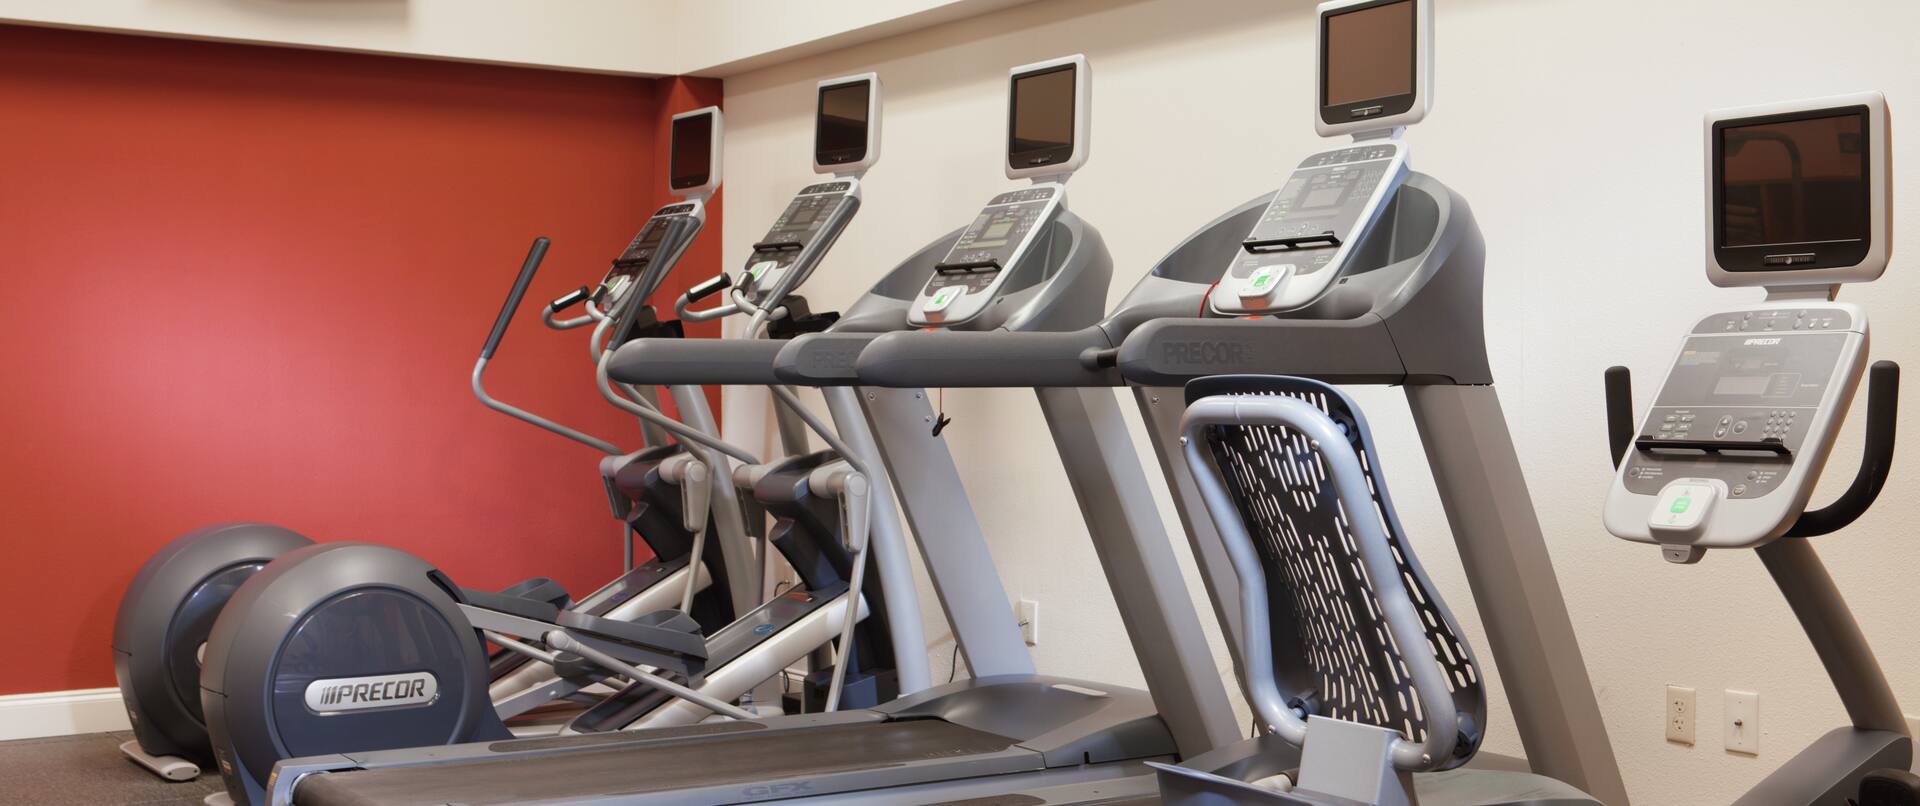 Fitness Center With TV and Cardio Machines